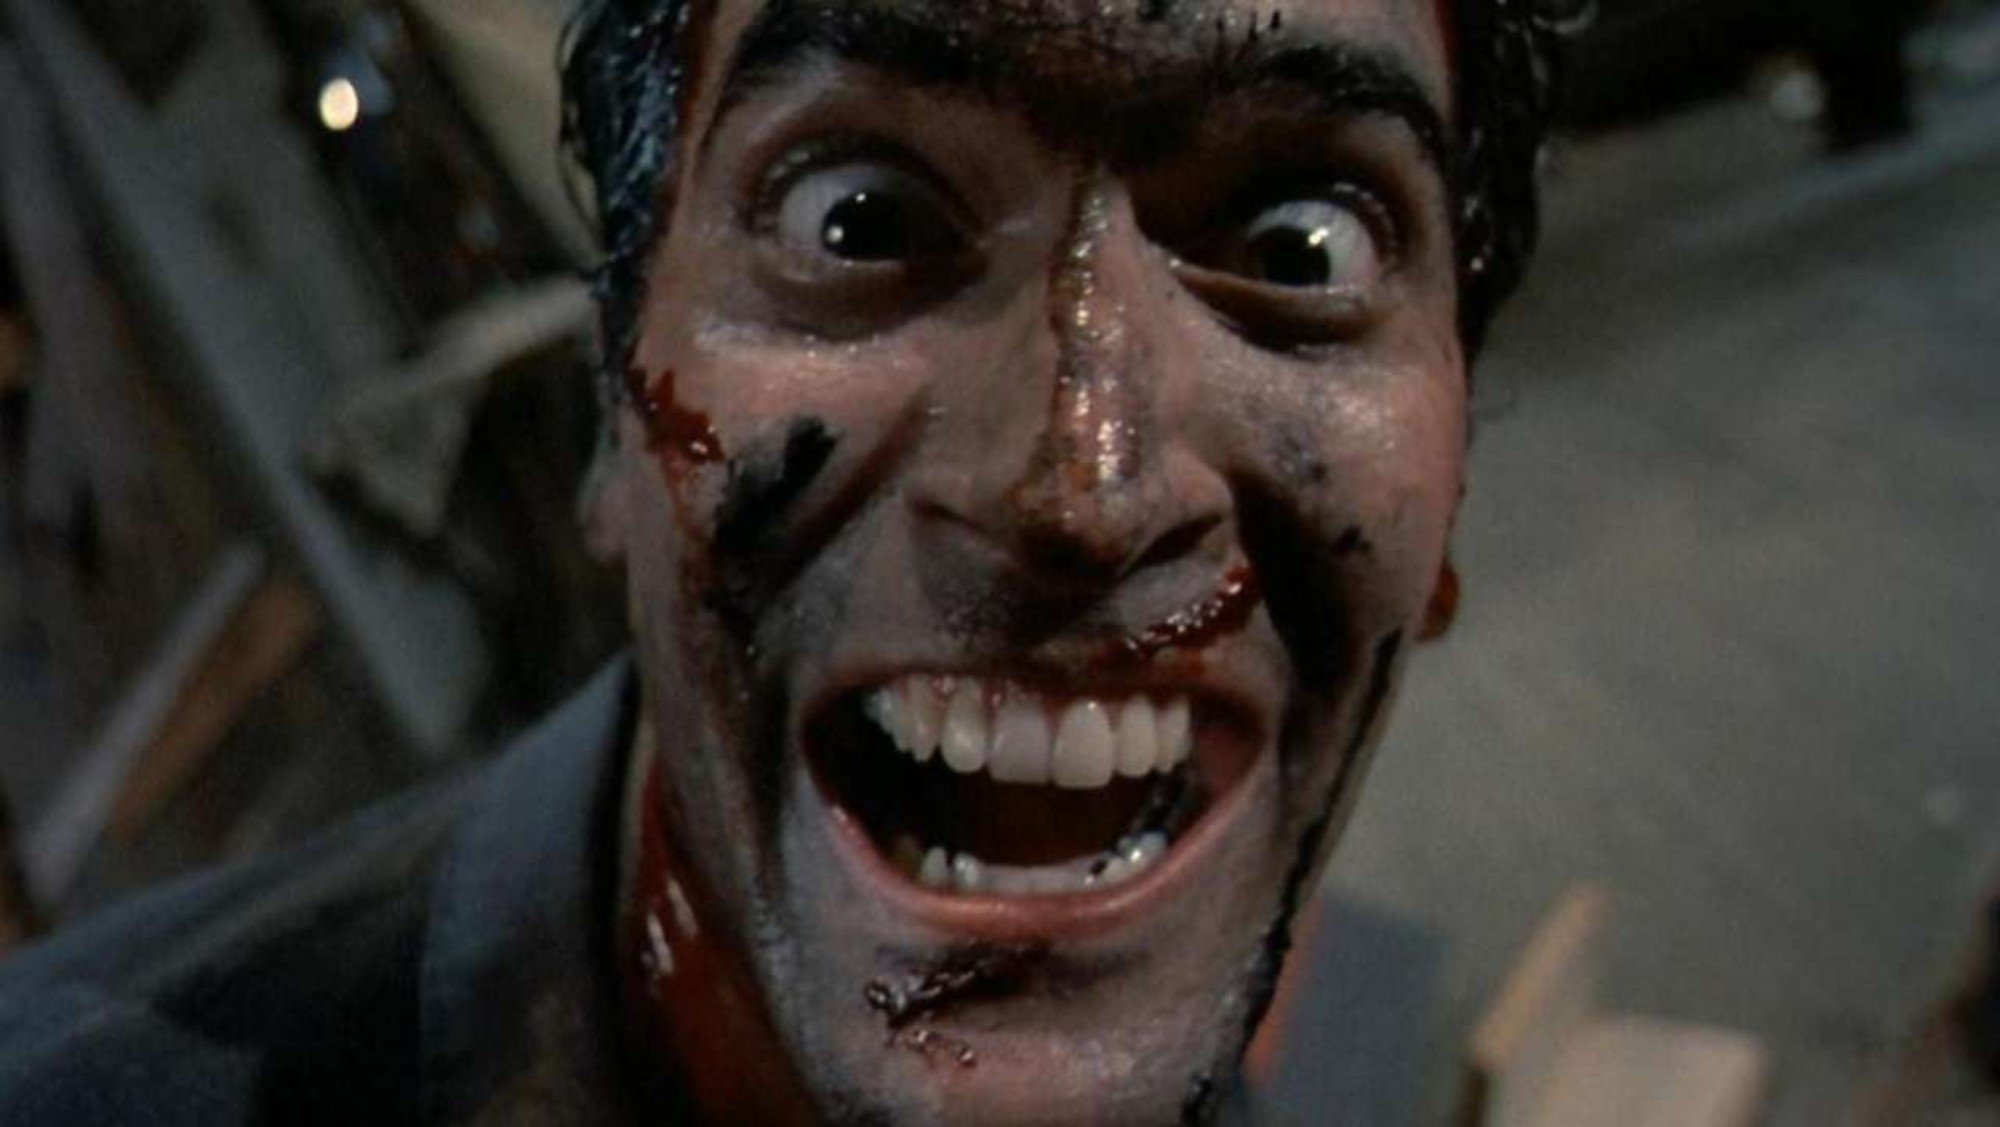 Sam Raimi and Bruce Campbell's 'Evil Dead' Movies Ranked Worst to Best